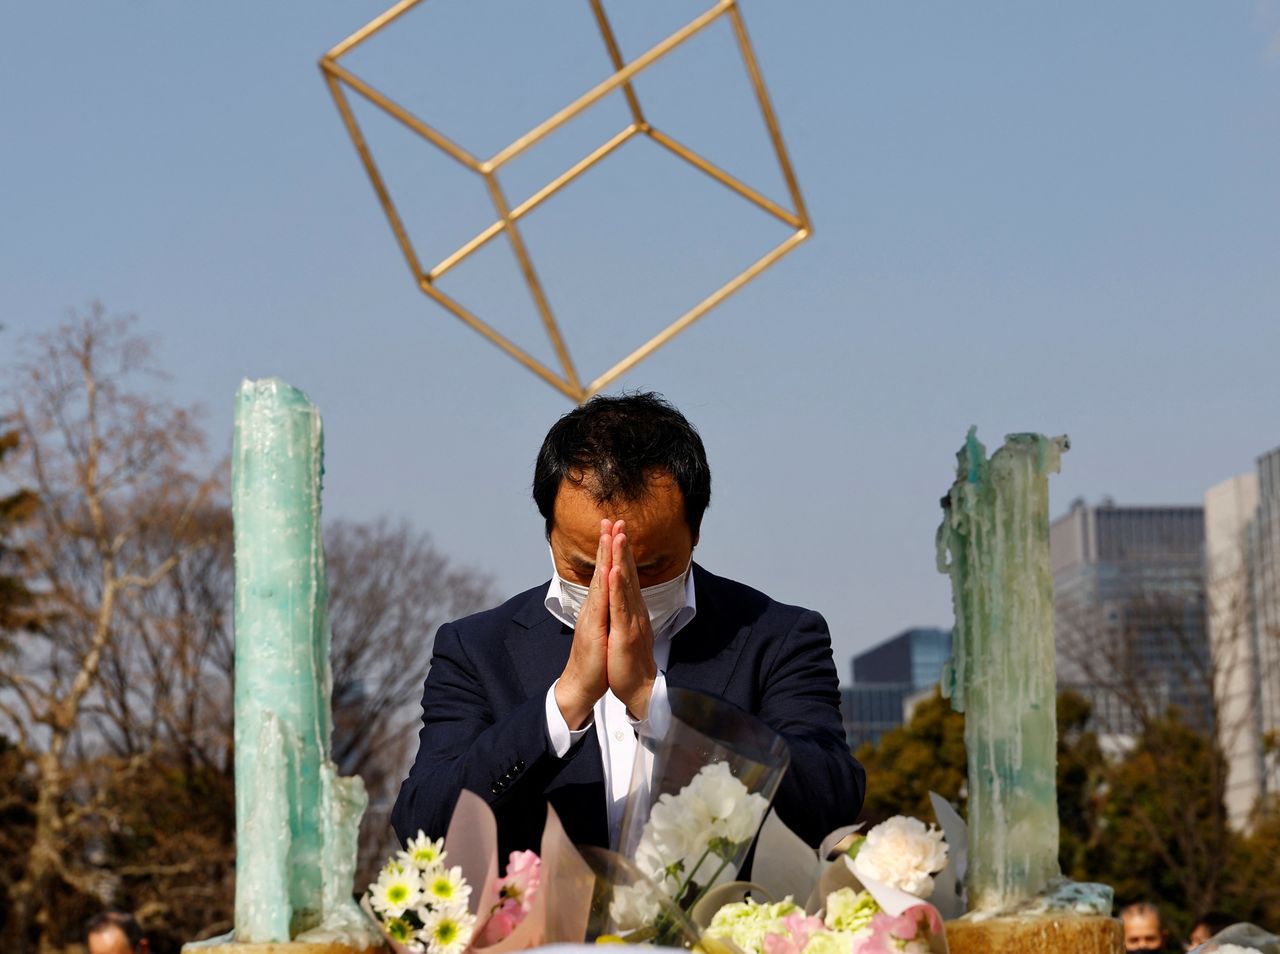 A man wearing a protective mask, amid the coronavirus disease (COVID-19) outbreak, prays to mourn the victims of the March 11, 2011 earthquake and tsunami, on the 11th anniversary of the events that killed thousands and set off a nuclear crisis, in Tokyo, Japan March 11, 2022. REUTERS/Kim Kyung-Hoon